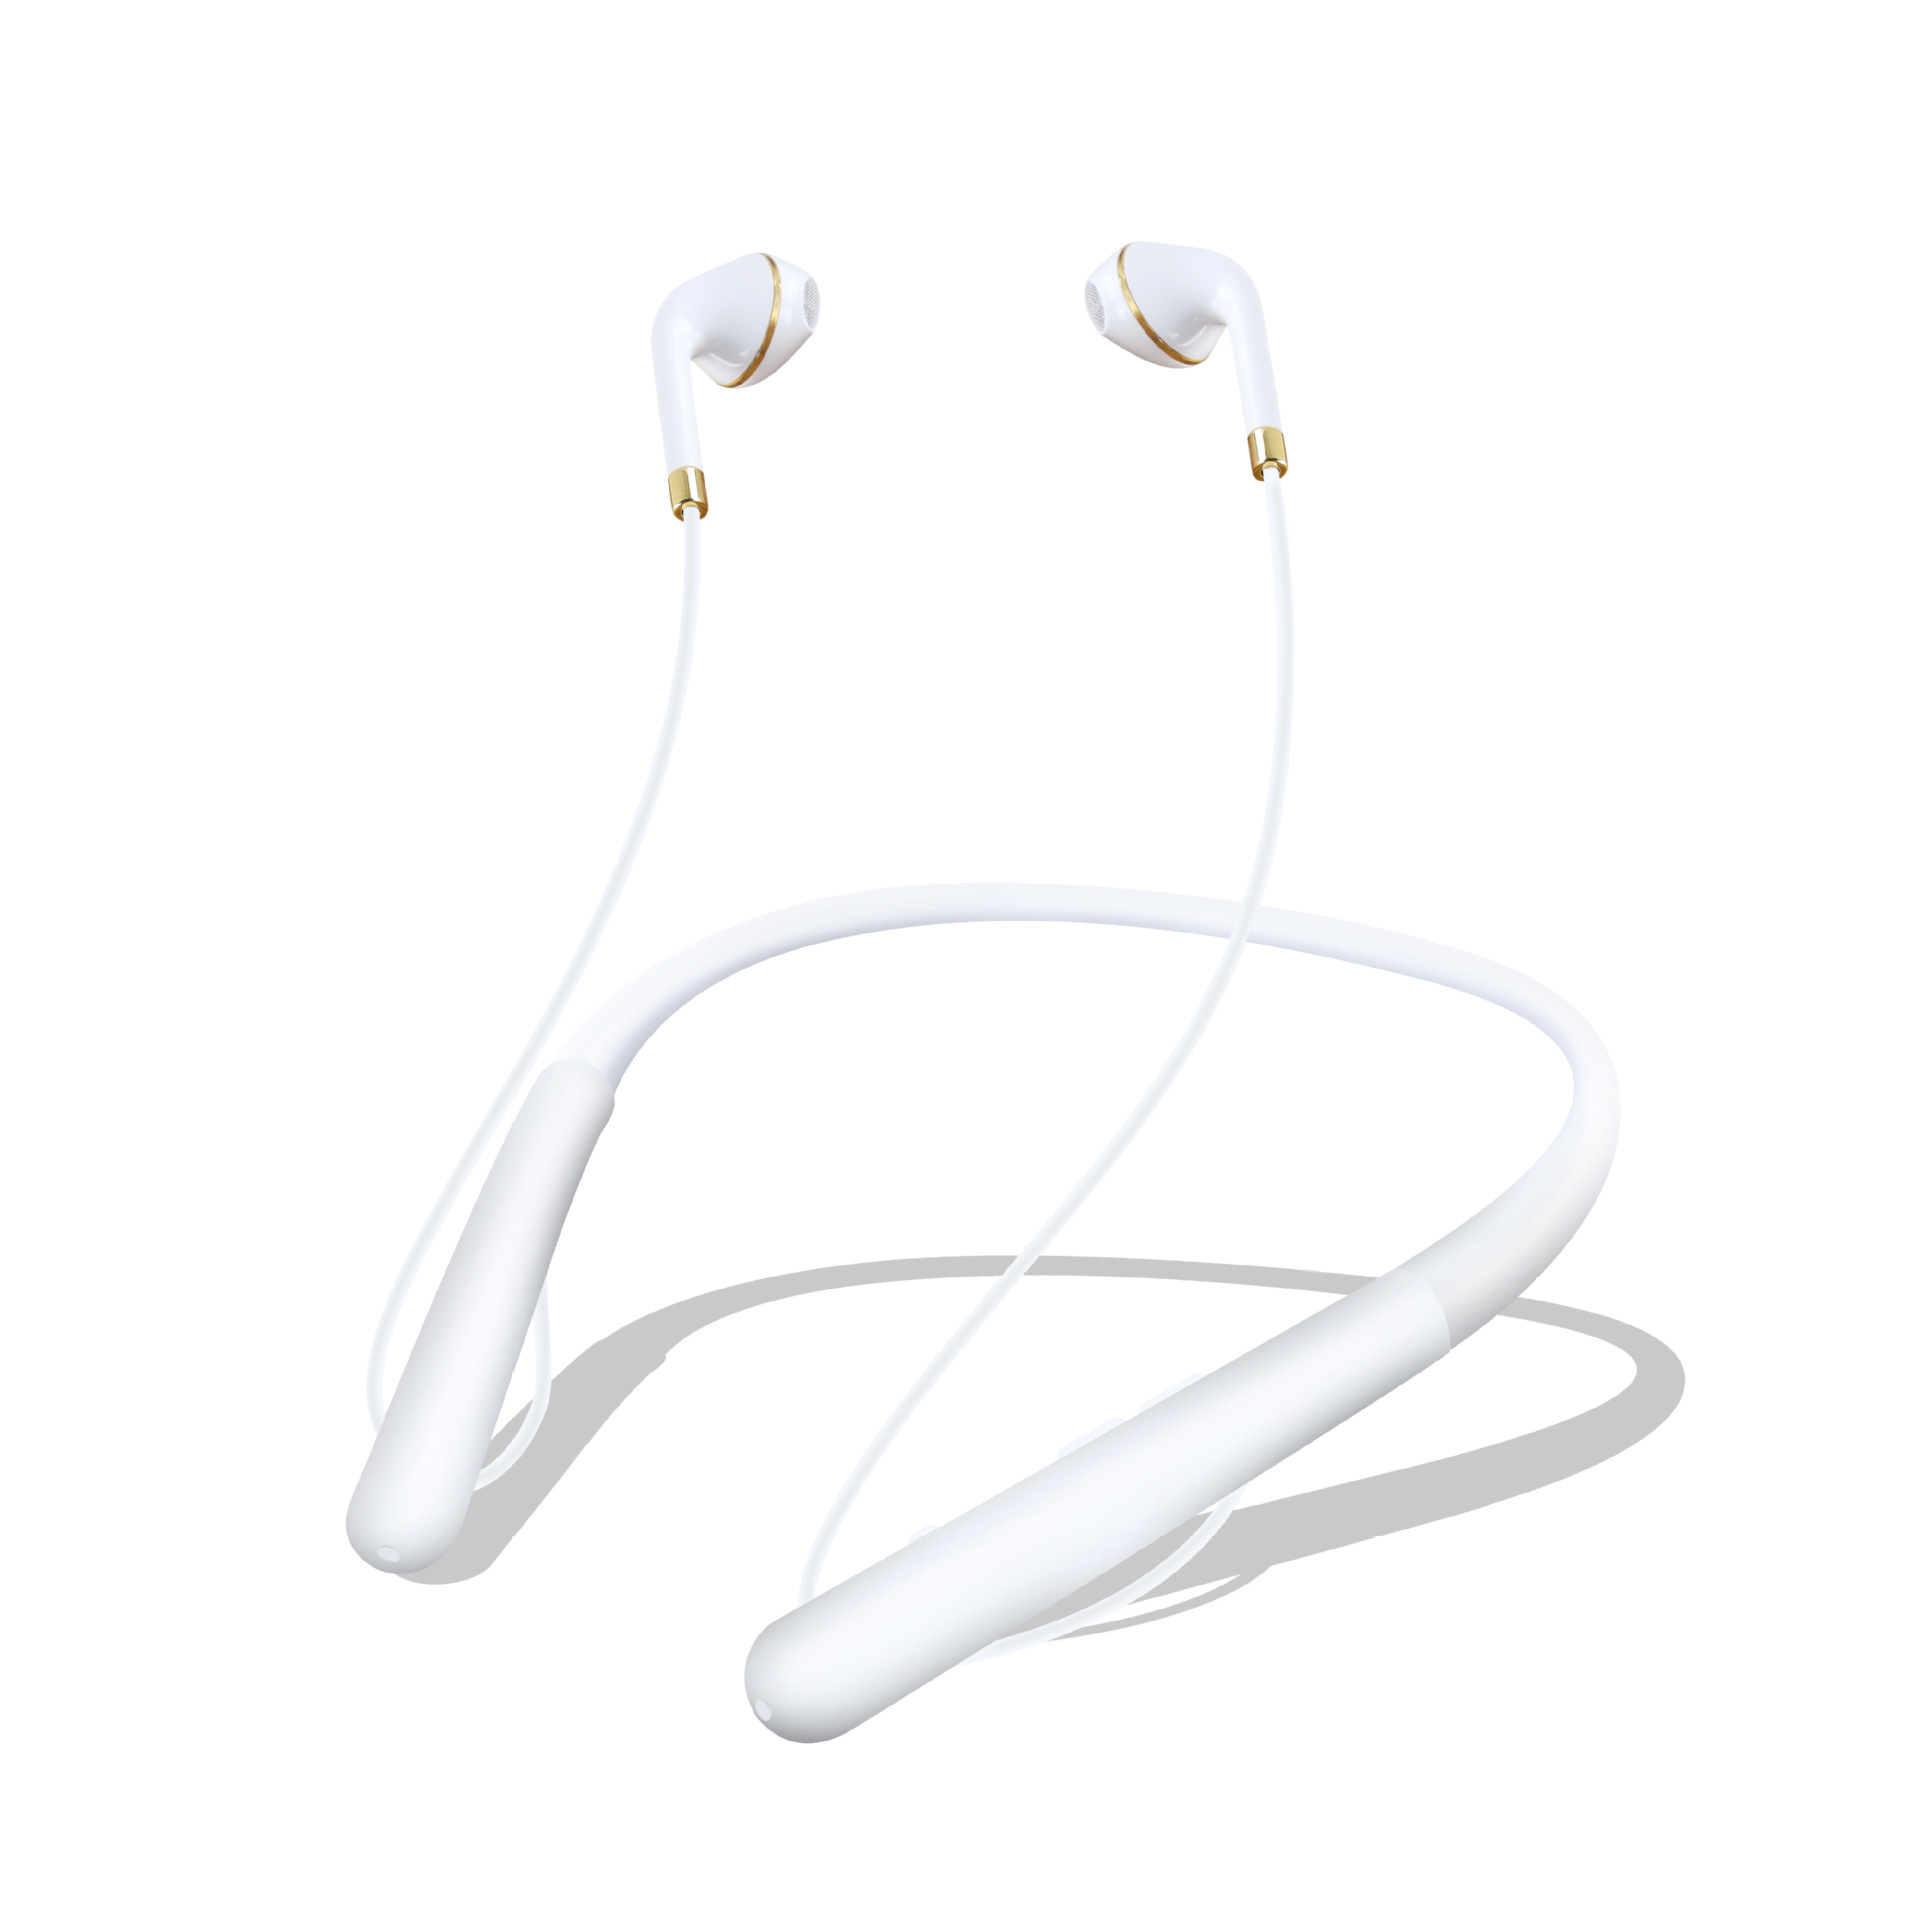 Slim Over the Neck Bluetooth Earphone Earbud with MicroSD MUSIC Slot TF200 (White)